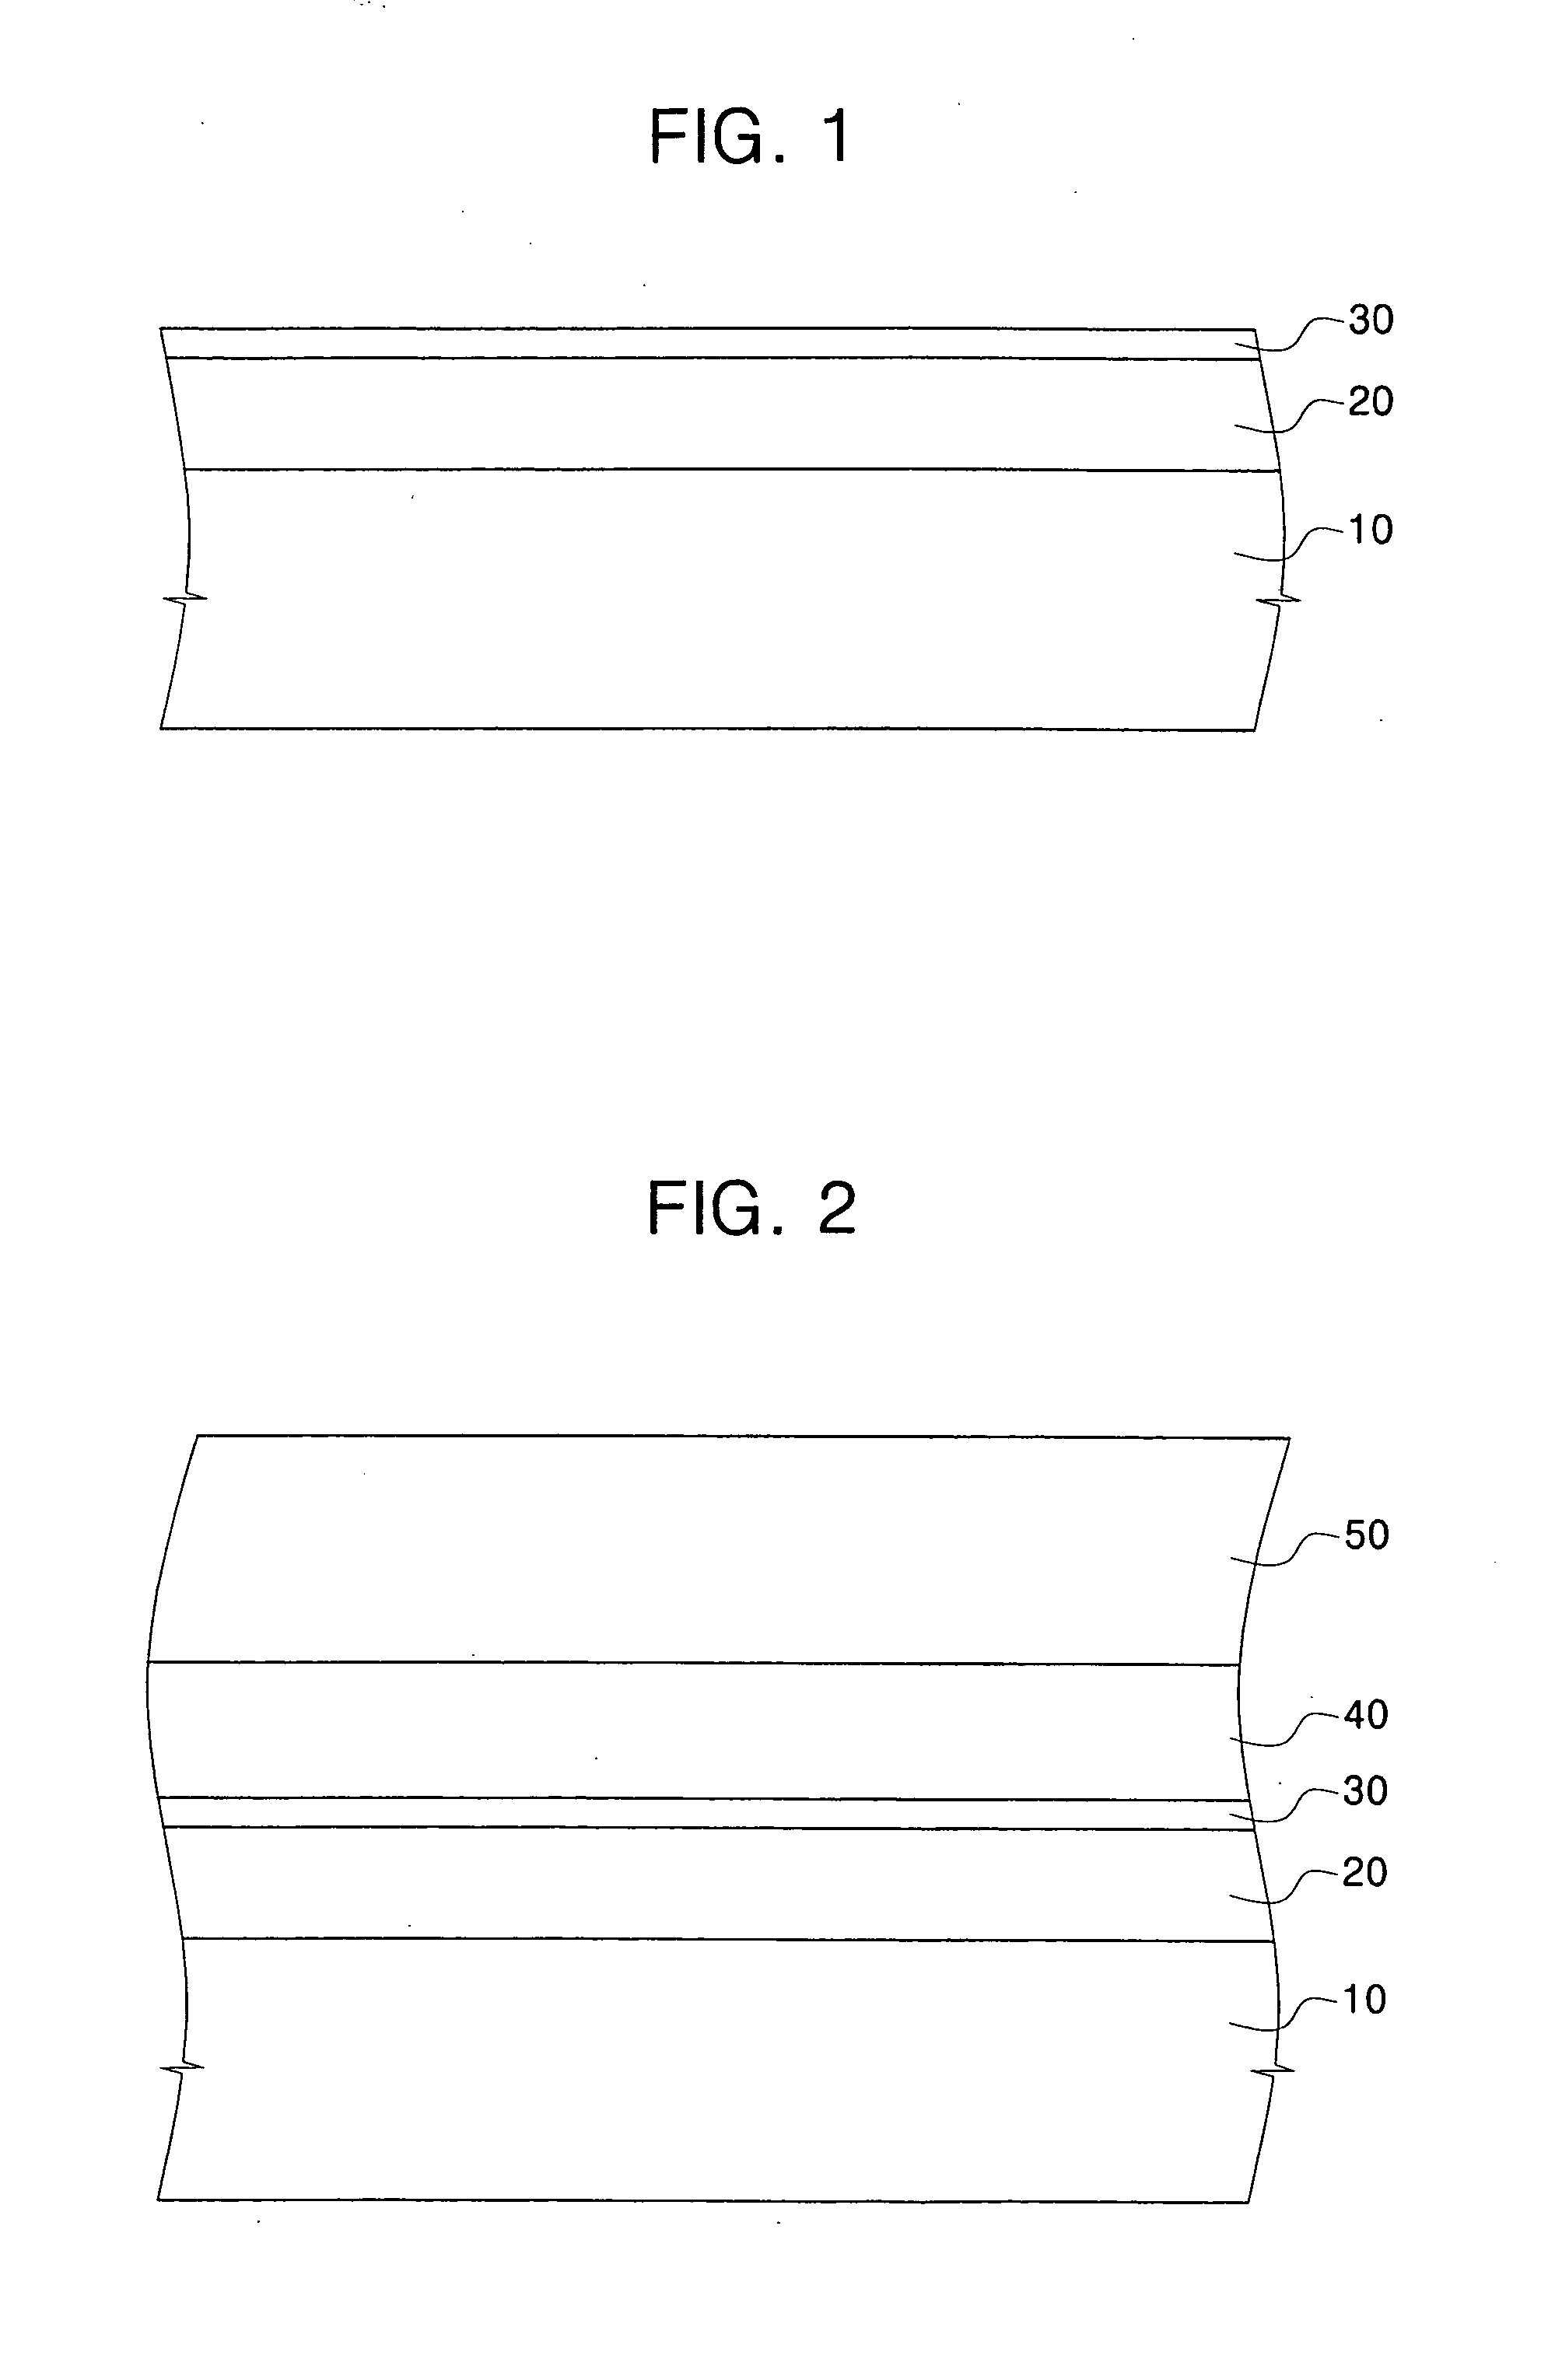 Methods of fabricating a semiconductor device using a dilute aqueous solution of an ammonia and peroxide mixture